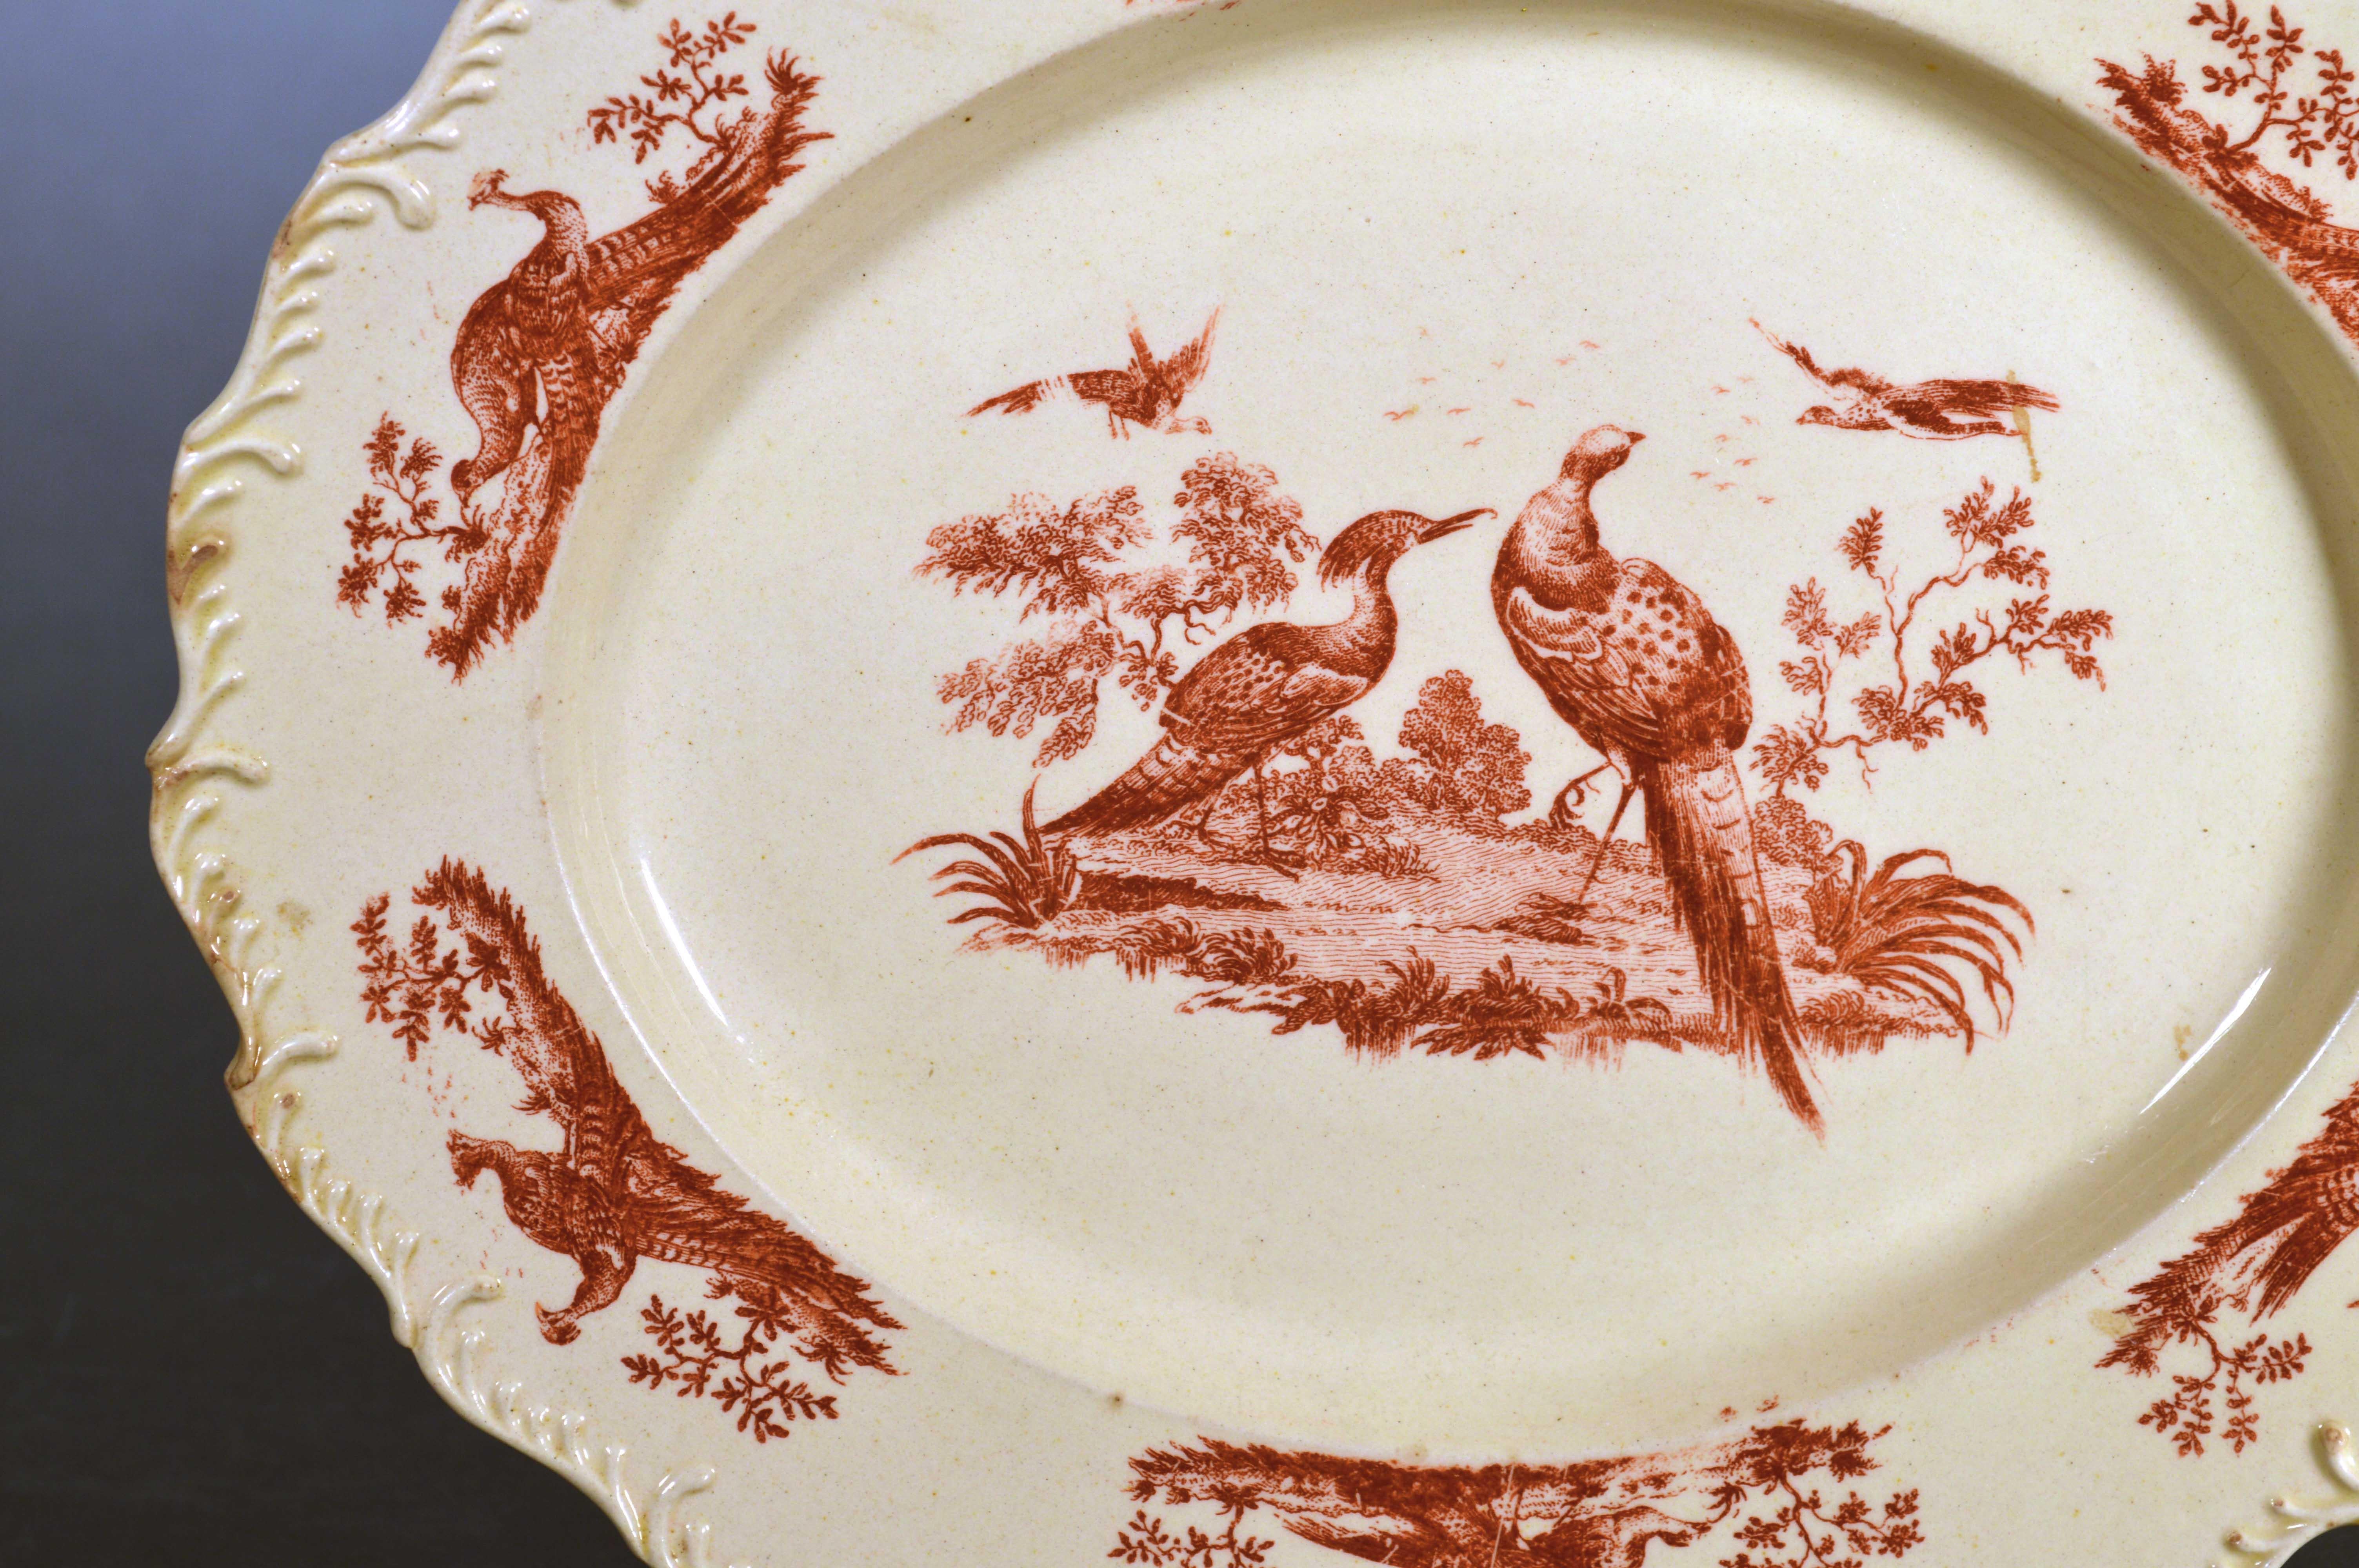 18th century English creamware dish with game bird decoration and feathered edge,
Josiah Wedgwood,
circa 1765,

The deep cream-colored oval creamware dish is decorated with printed exotic birds in carmine red created by Sadler & Green of Liverpool.